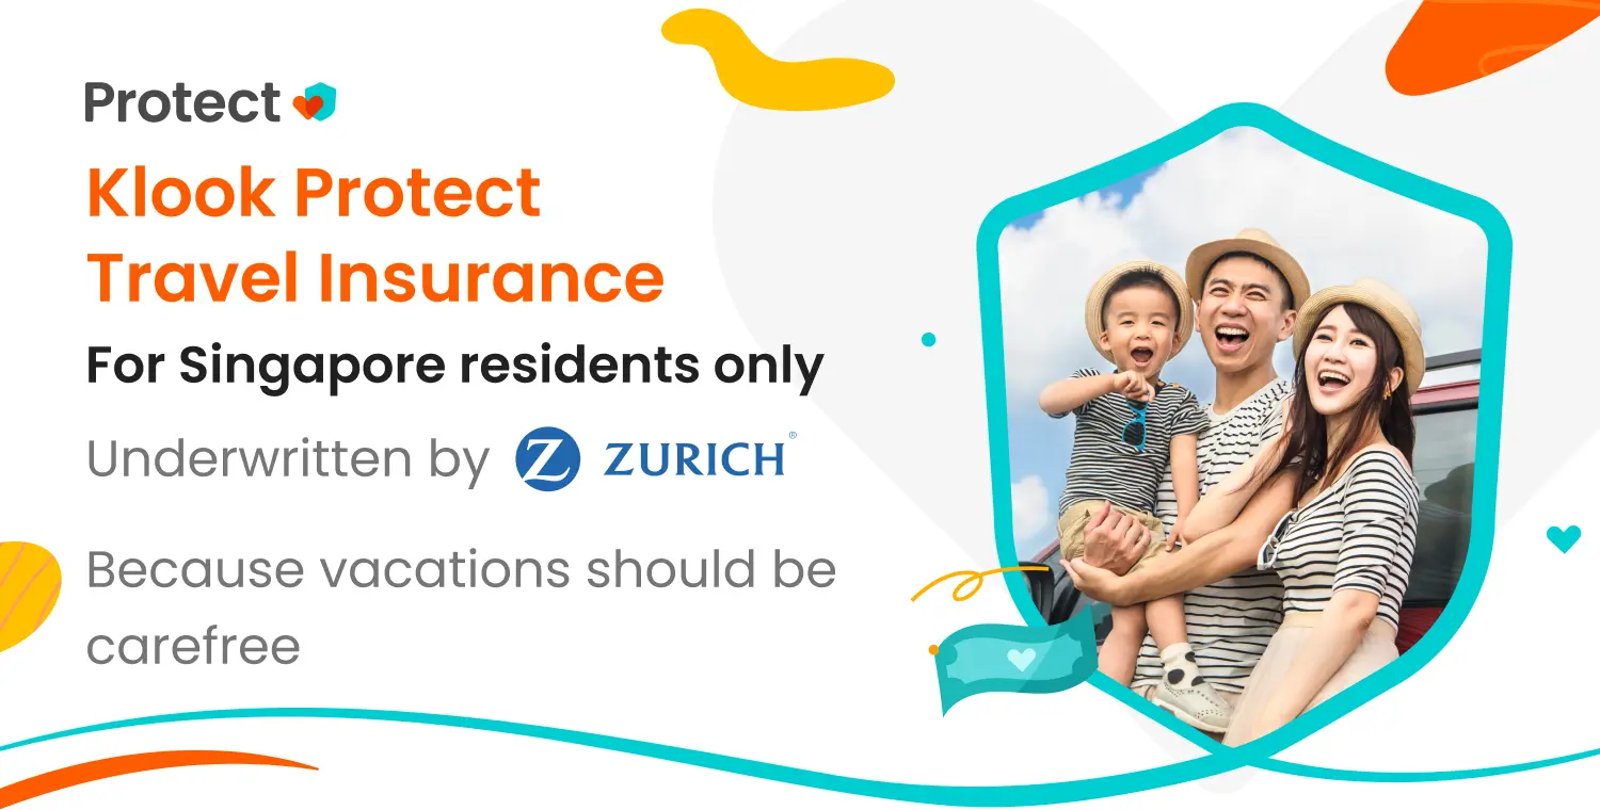 Klook Protect Travel Insurance